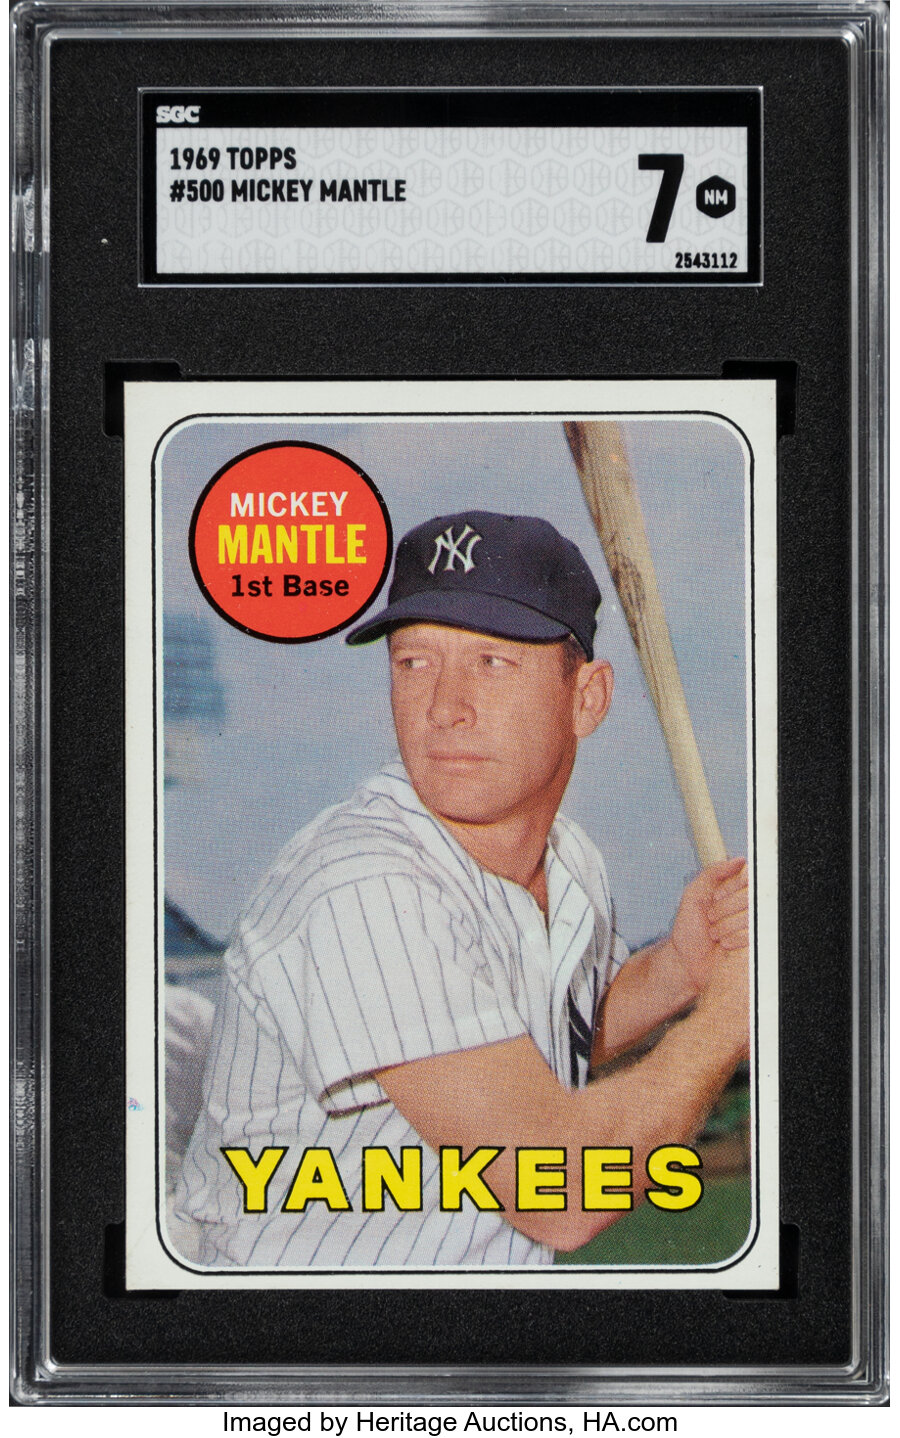 1969 Topps Mickey Mantle (Last Name in Yellow) #500 SGC NM 7